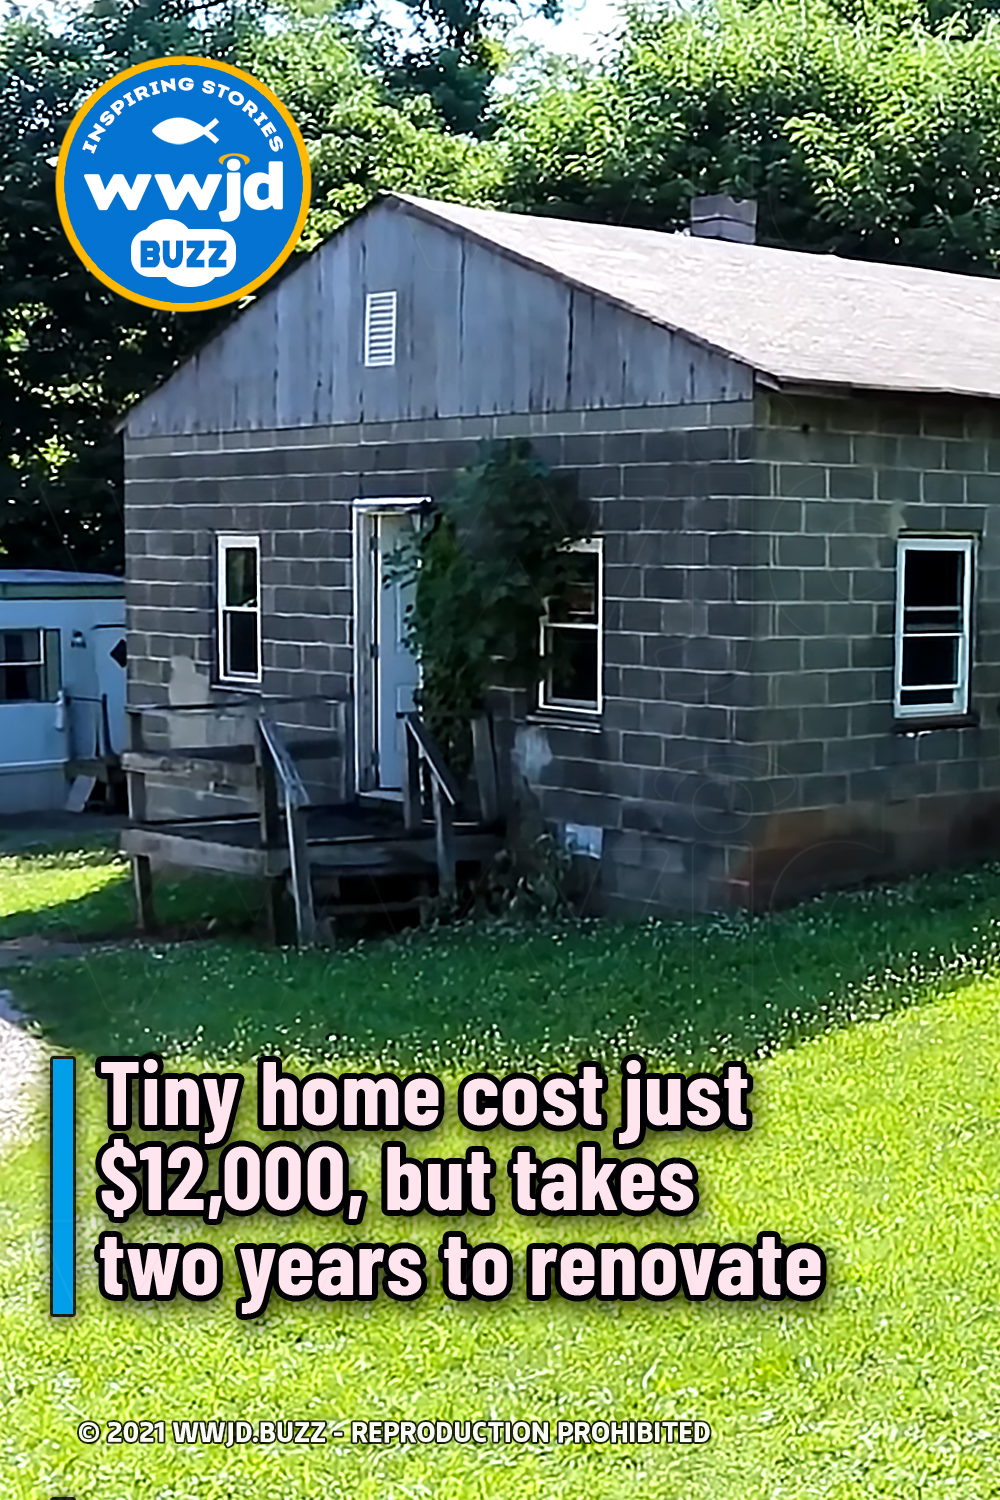 Tiny home cost just $12,000, but takes two years to renovate